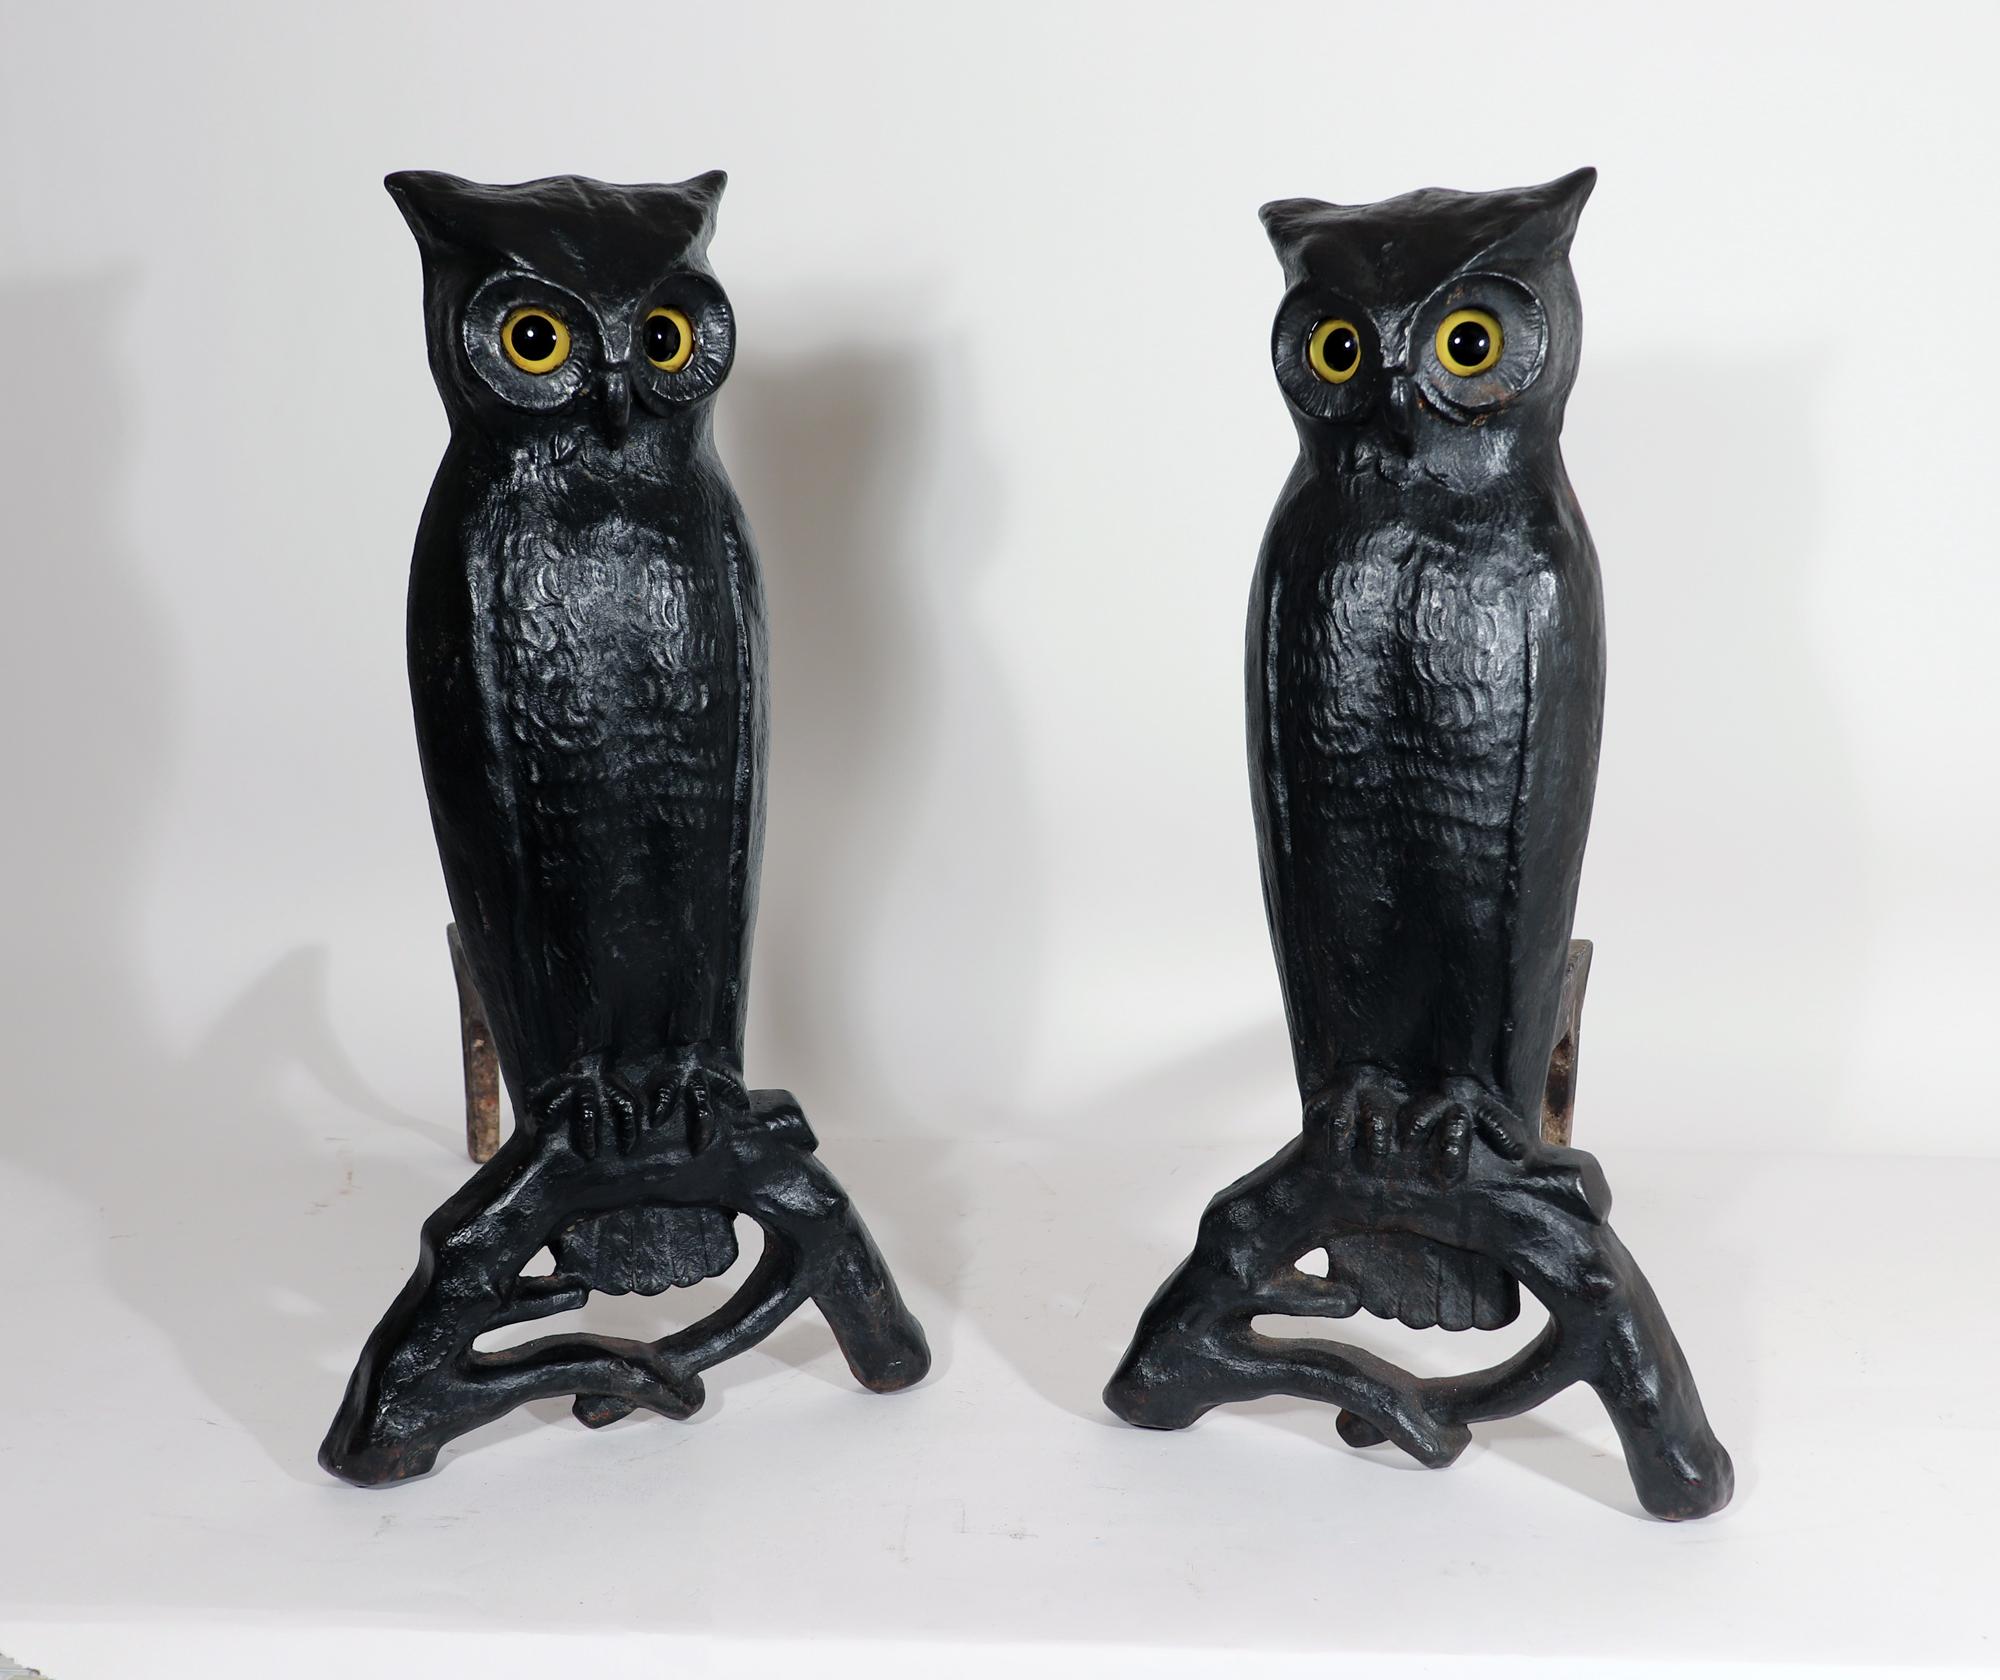 American Cast Iron Owl Andirons With Yellow Glass Eyes,
Circa 1900

The pair of cast iron andirons are each made in the form of a large owl standing on a log. The owls with their original yellow glass eyes. They have a lovely patina.

The dogs